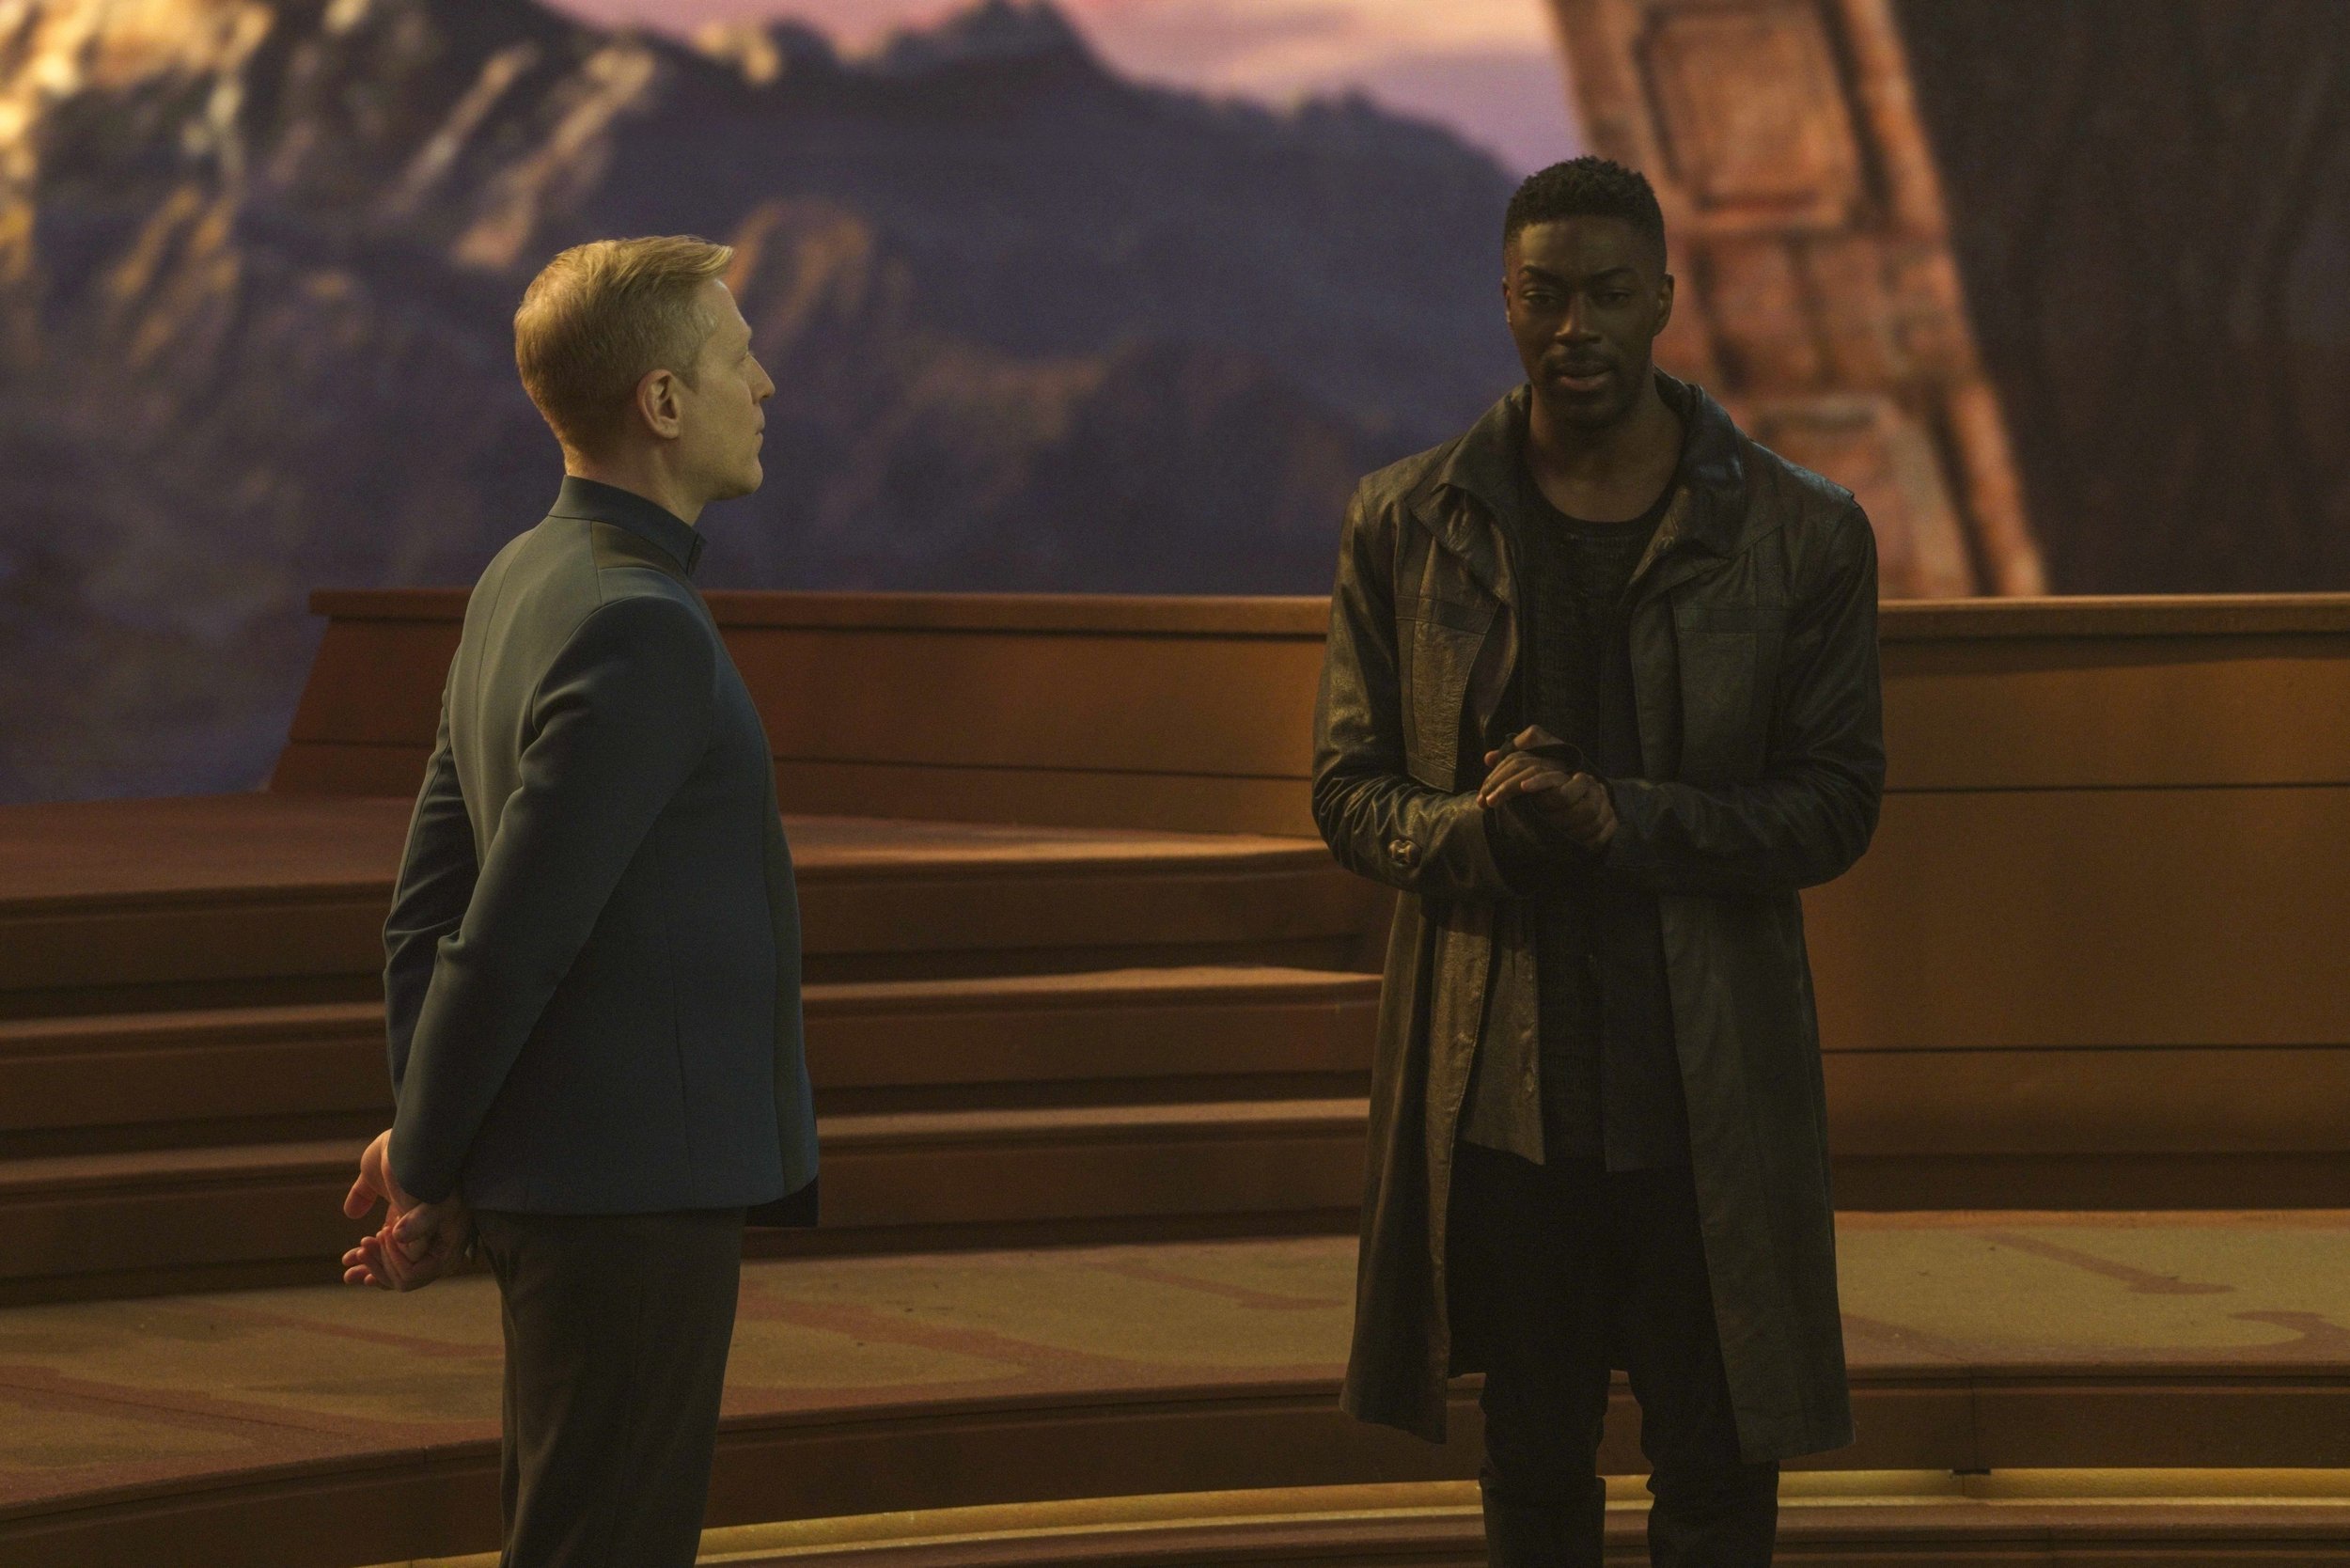   Pictured: Anthony Rapp as Stamets and David Ajala as Book of the Paramount+ original series STAR TREK: DISCOVERY. Photo Cr: Michael Gibson/Paramount+ © 2021 CBS Interactive. All Rights Reserved.  